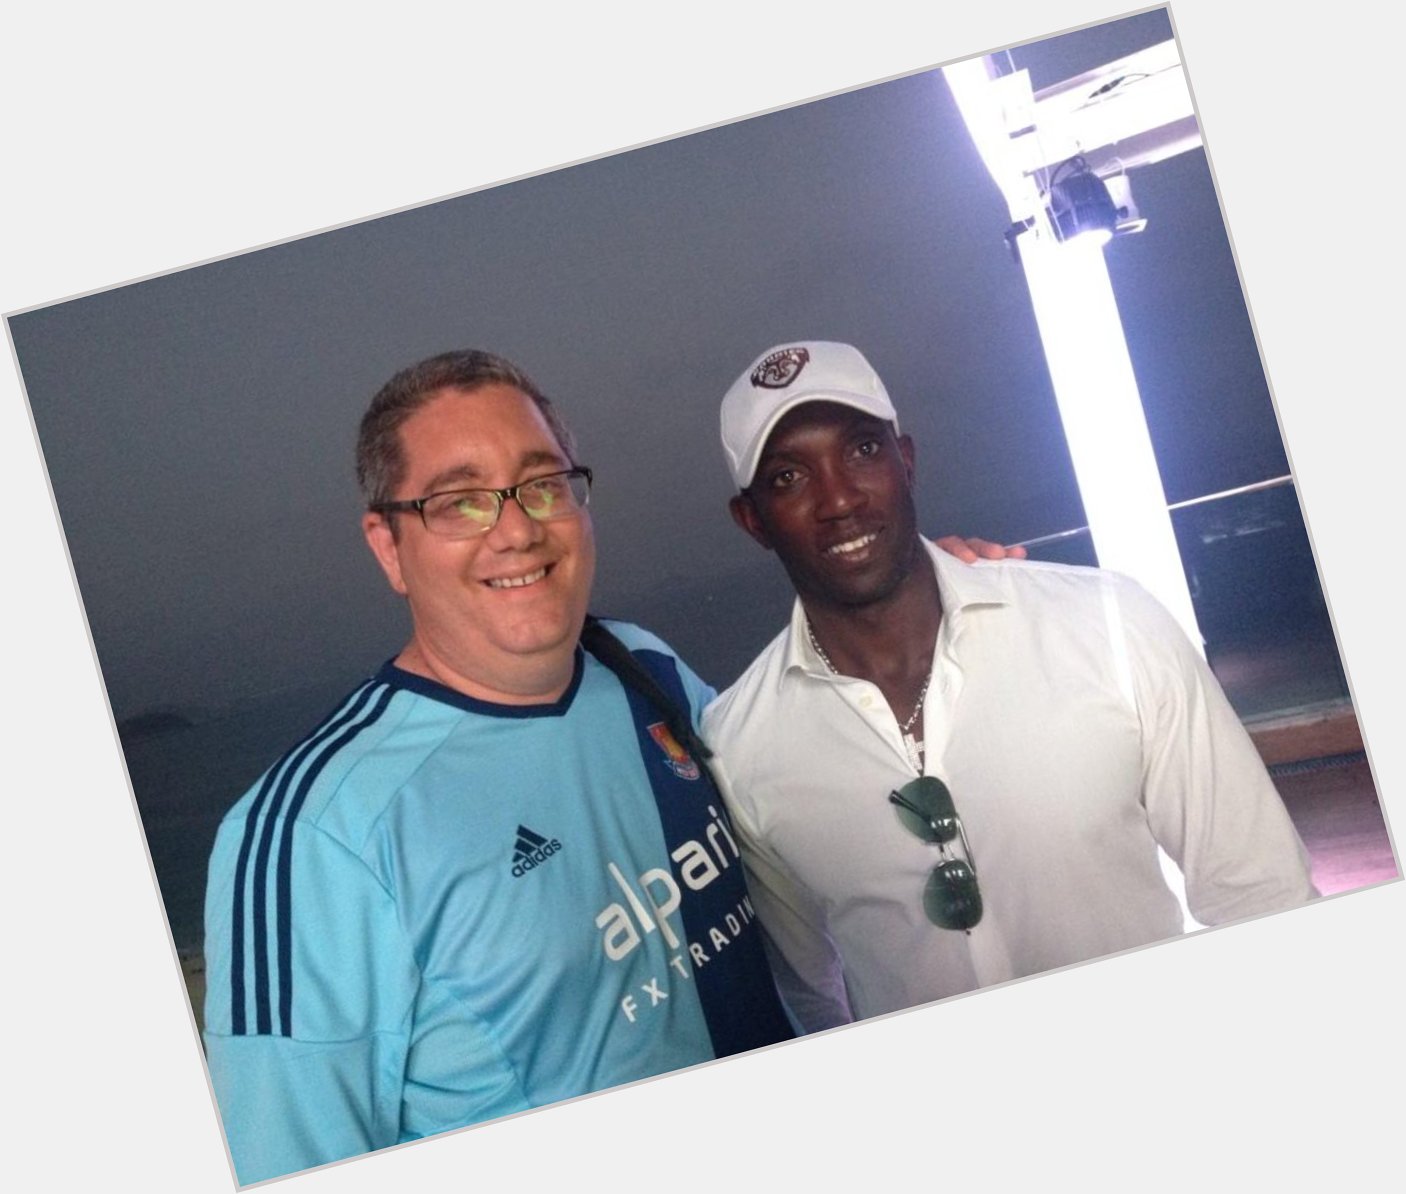 Happy 46th Birthday to Dwight Yorke, have a great day my friend 